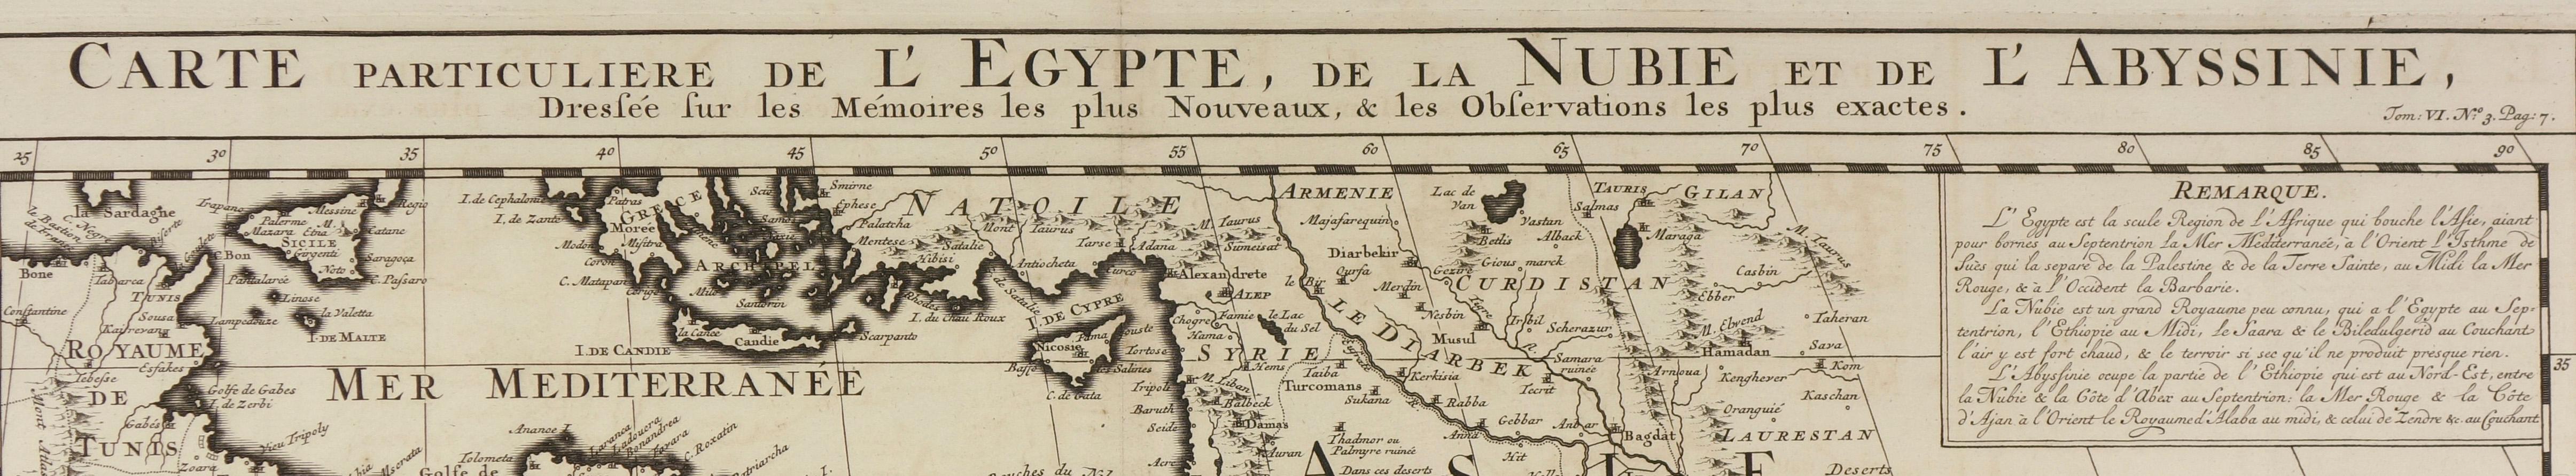 Map of Egypt, Nubia and Part of Abyssinia  - Realist Print by Henri-Abraham Chatelain